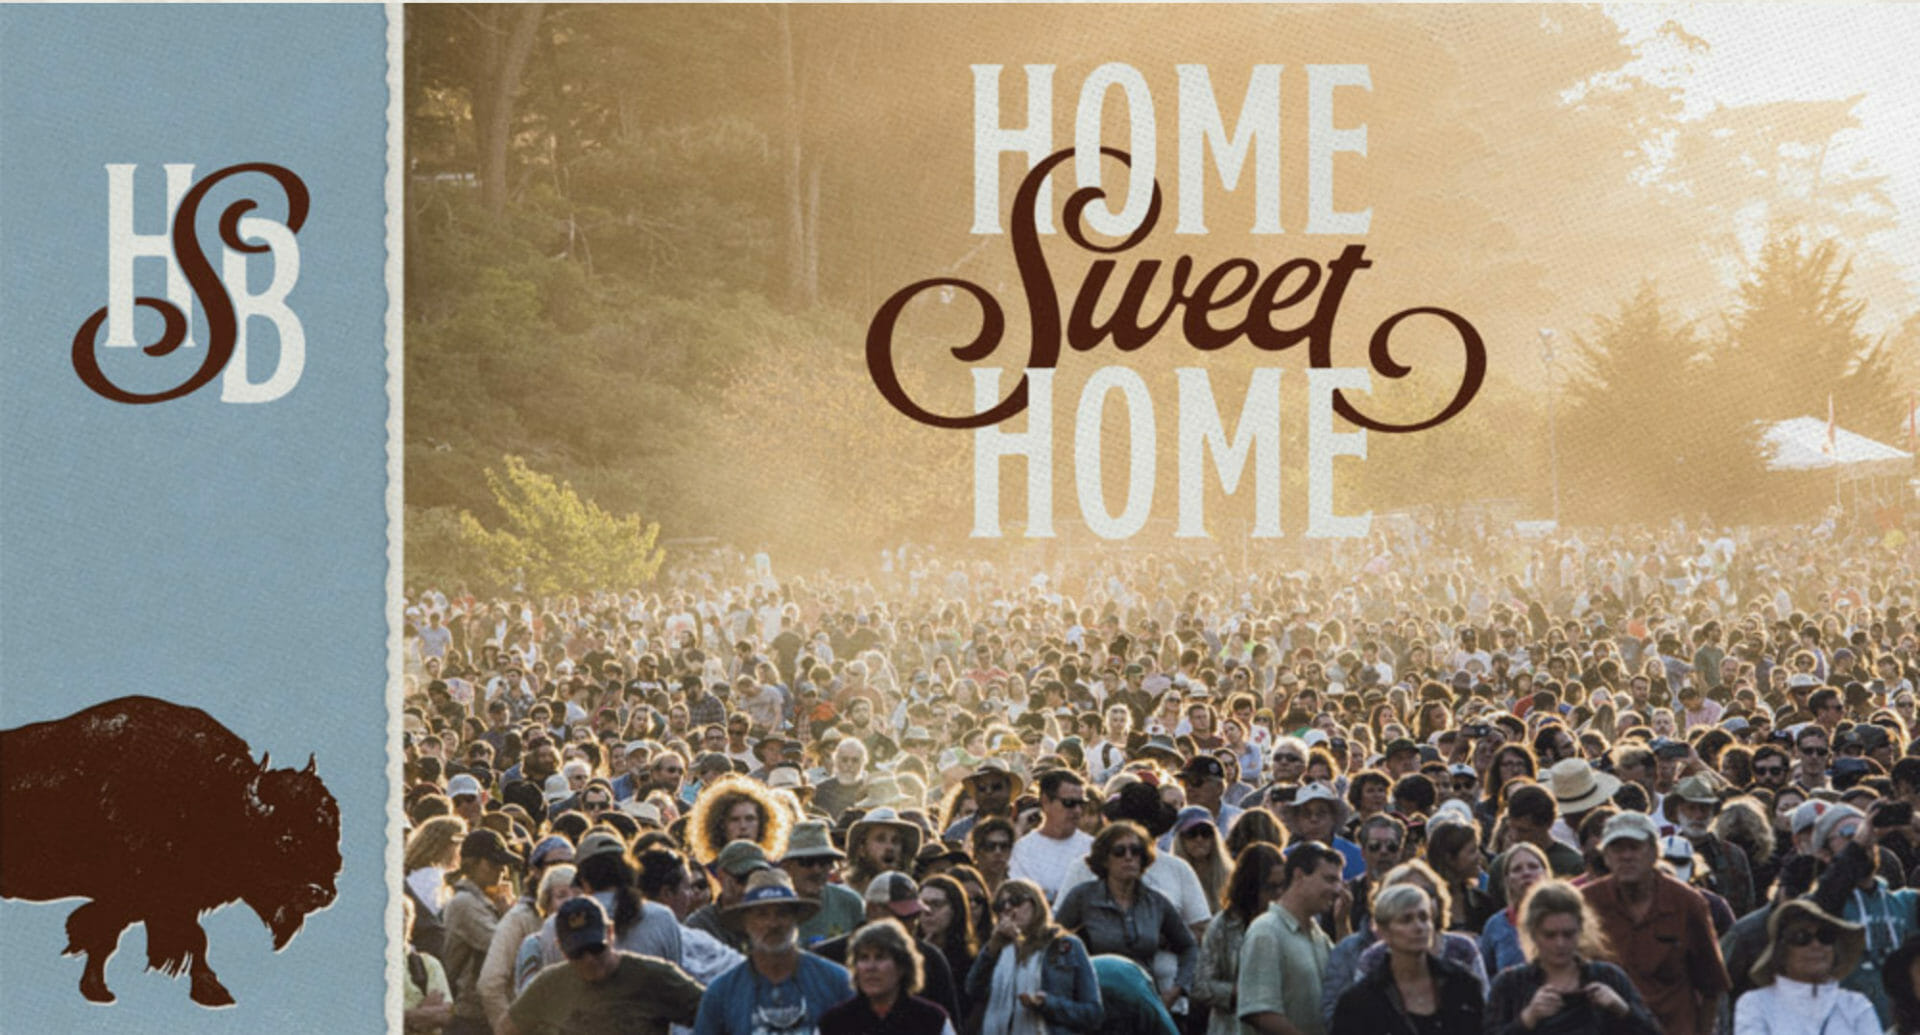 Hardly Strictly Bluegrass Releases Initial Artist Lineup: Marcus Mumford, Allison Russell, Las Cafeteras, Lucius and More